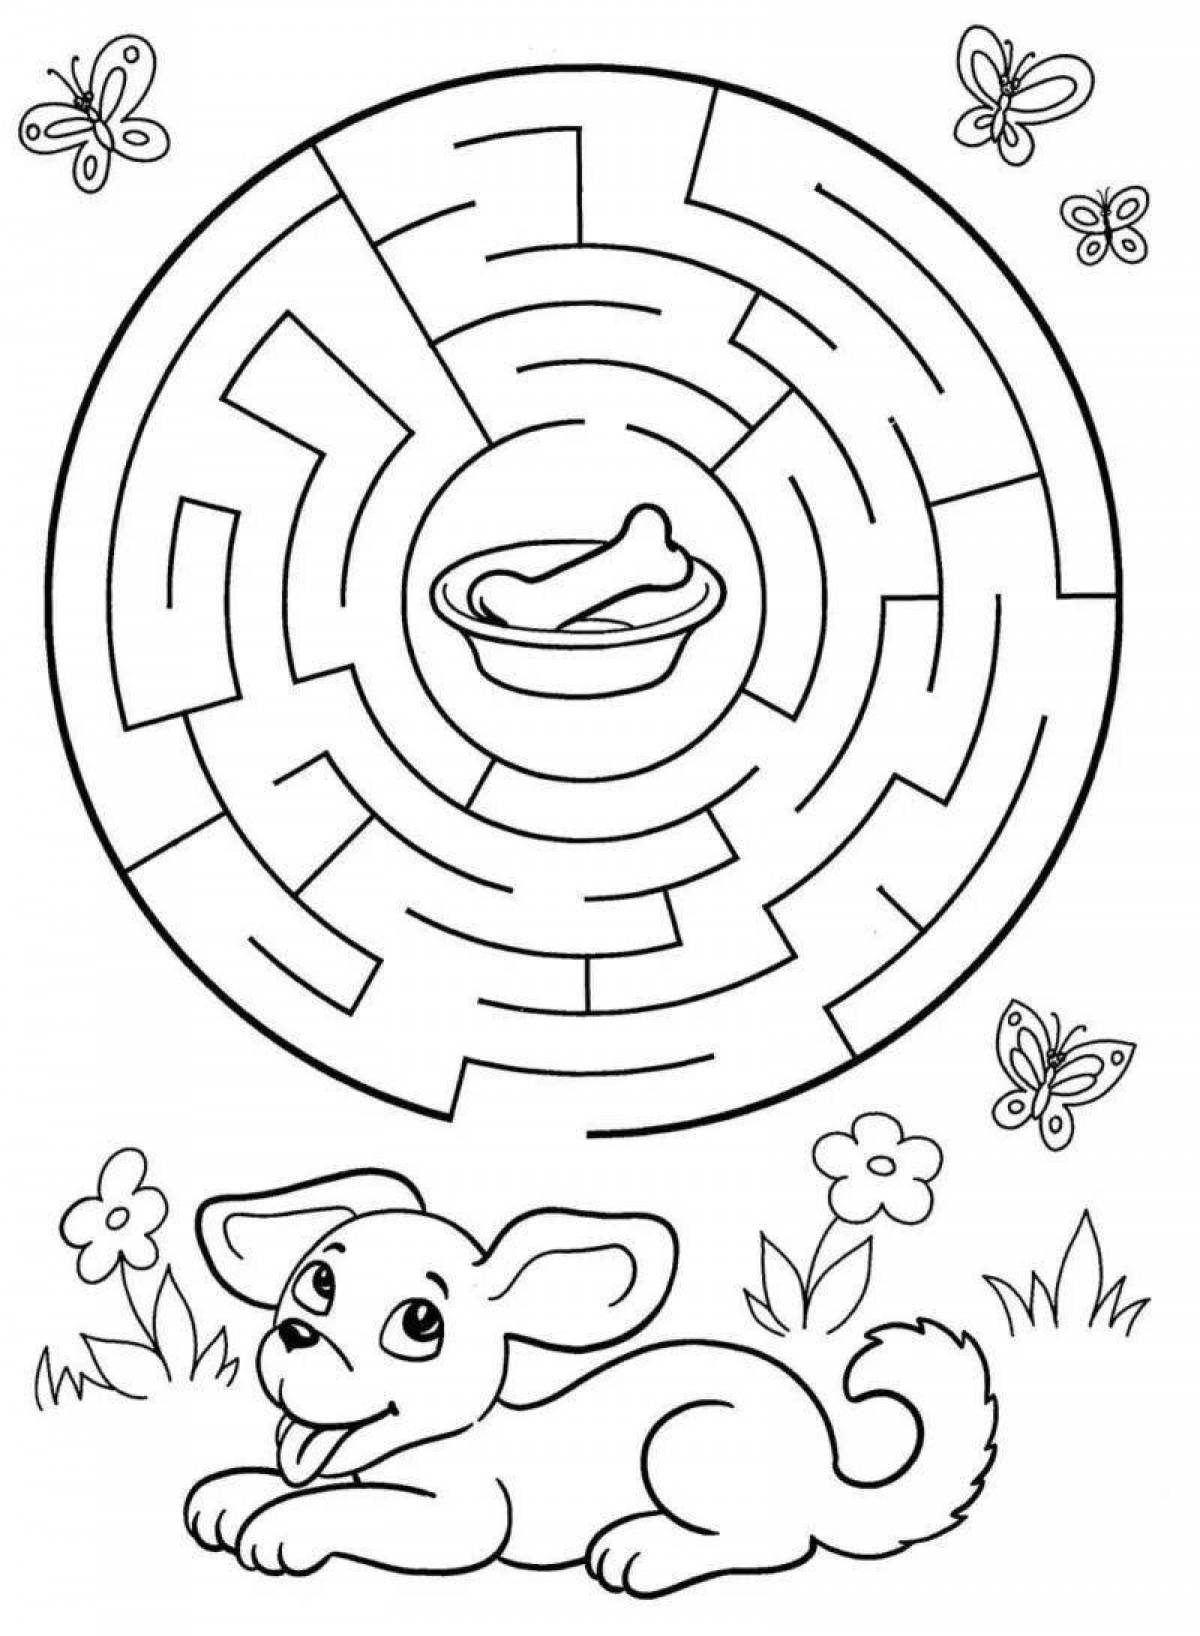 Creative coloring pages for 7 year olds